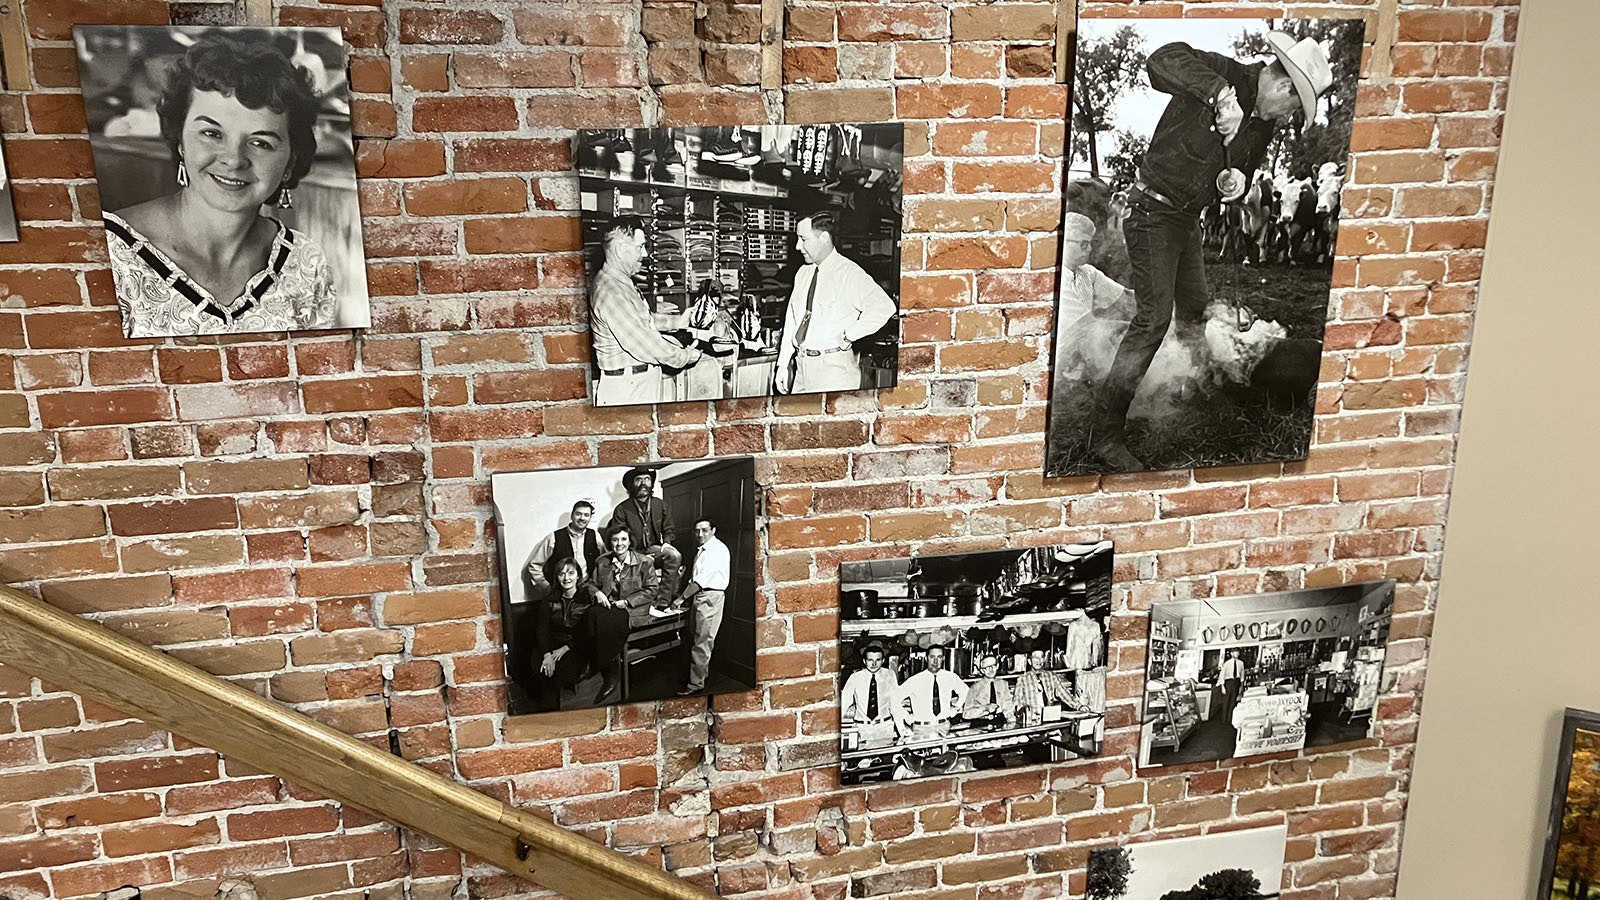 A history of a family who have lived the cowboy lifestyle through their own ranch in Fort Laramie decorates a wall at Lou Taubert Ranch Outfitters.